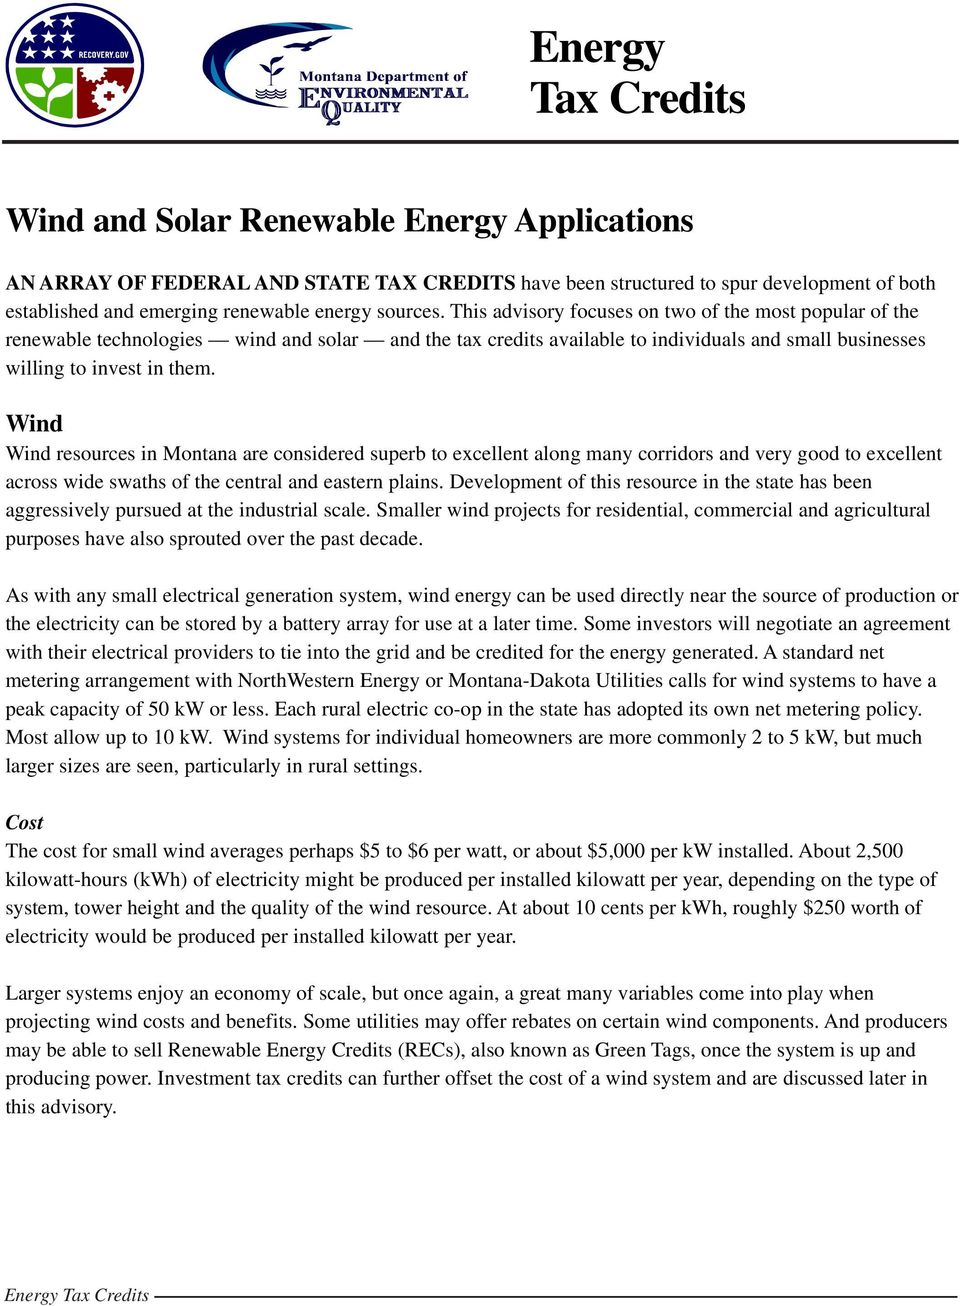 Wind Wind resources in Montana are considered superb to excellent along many corridors and very good to excellent across wide swaths of the central and eastern plains.